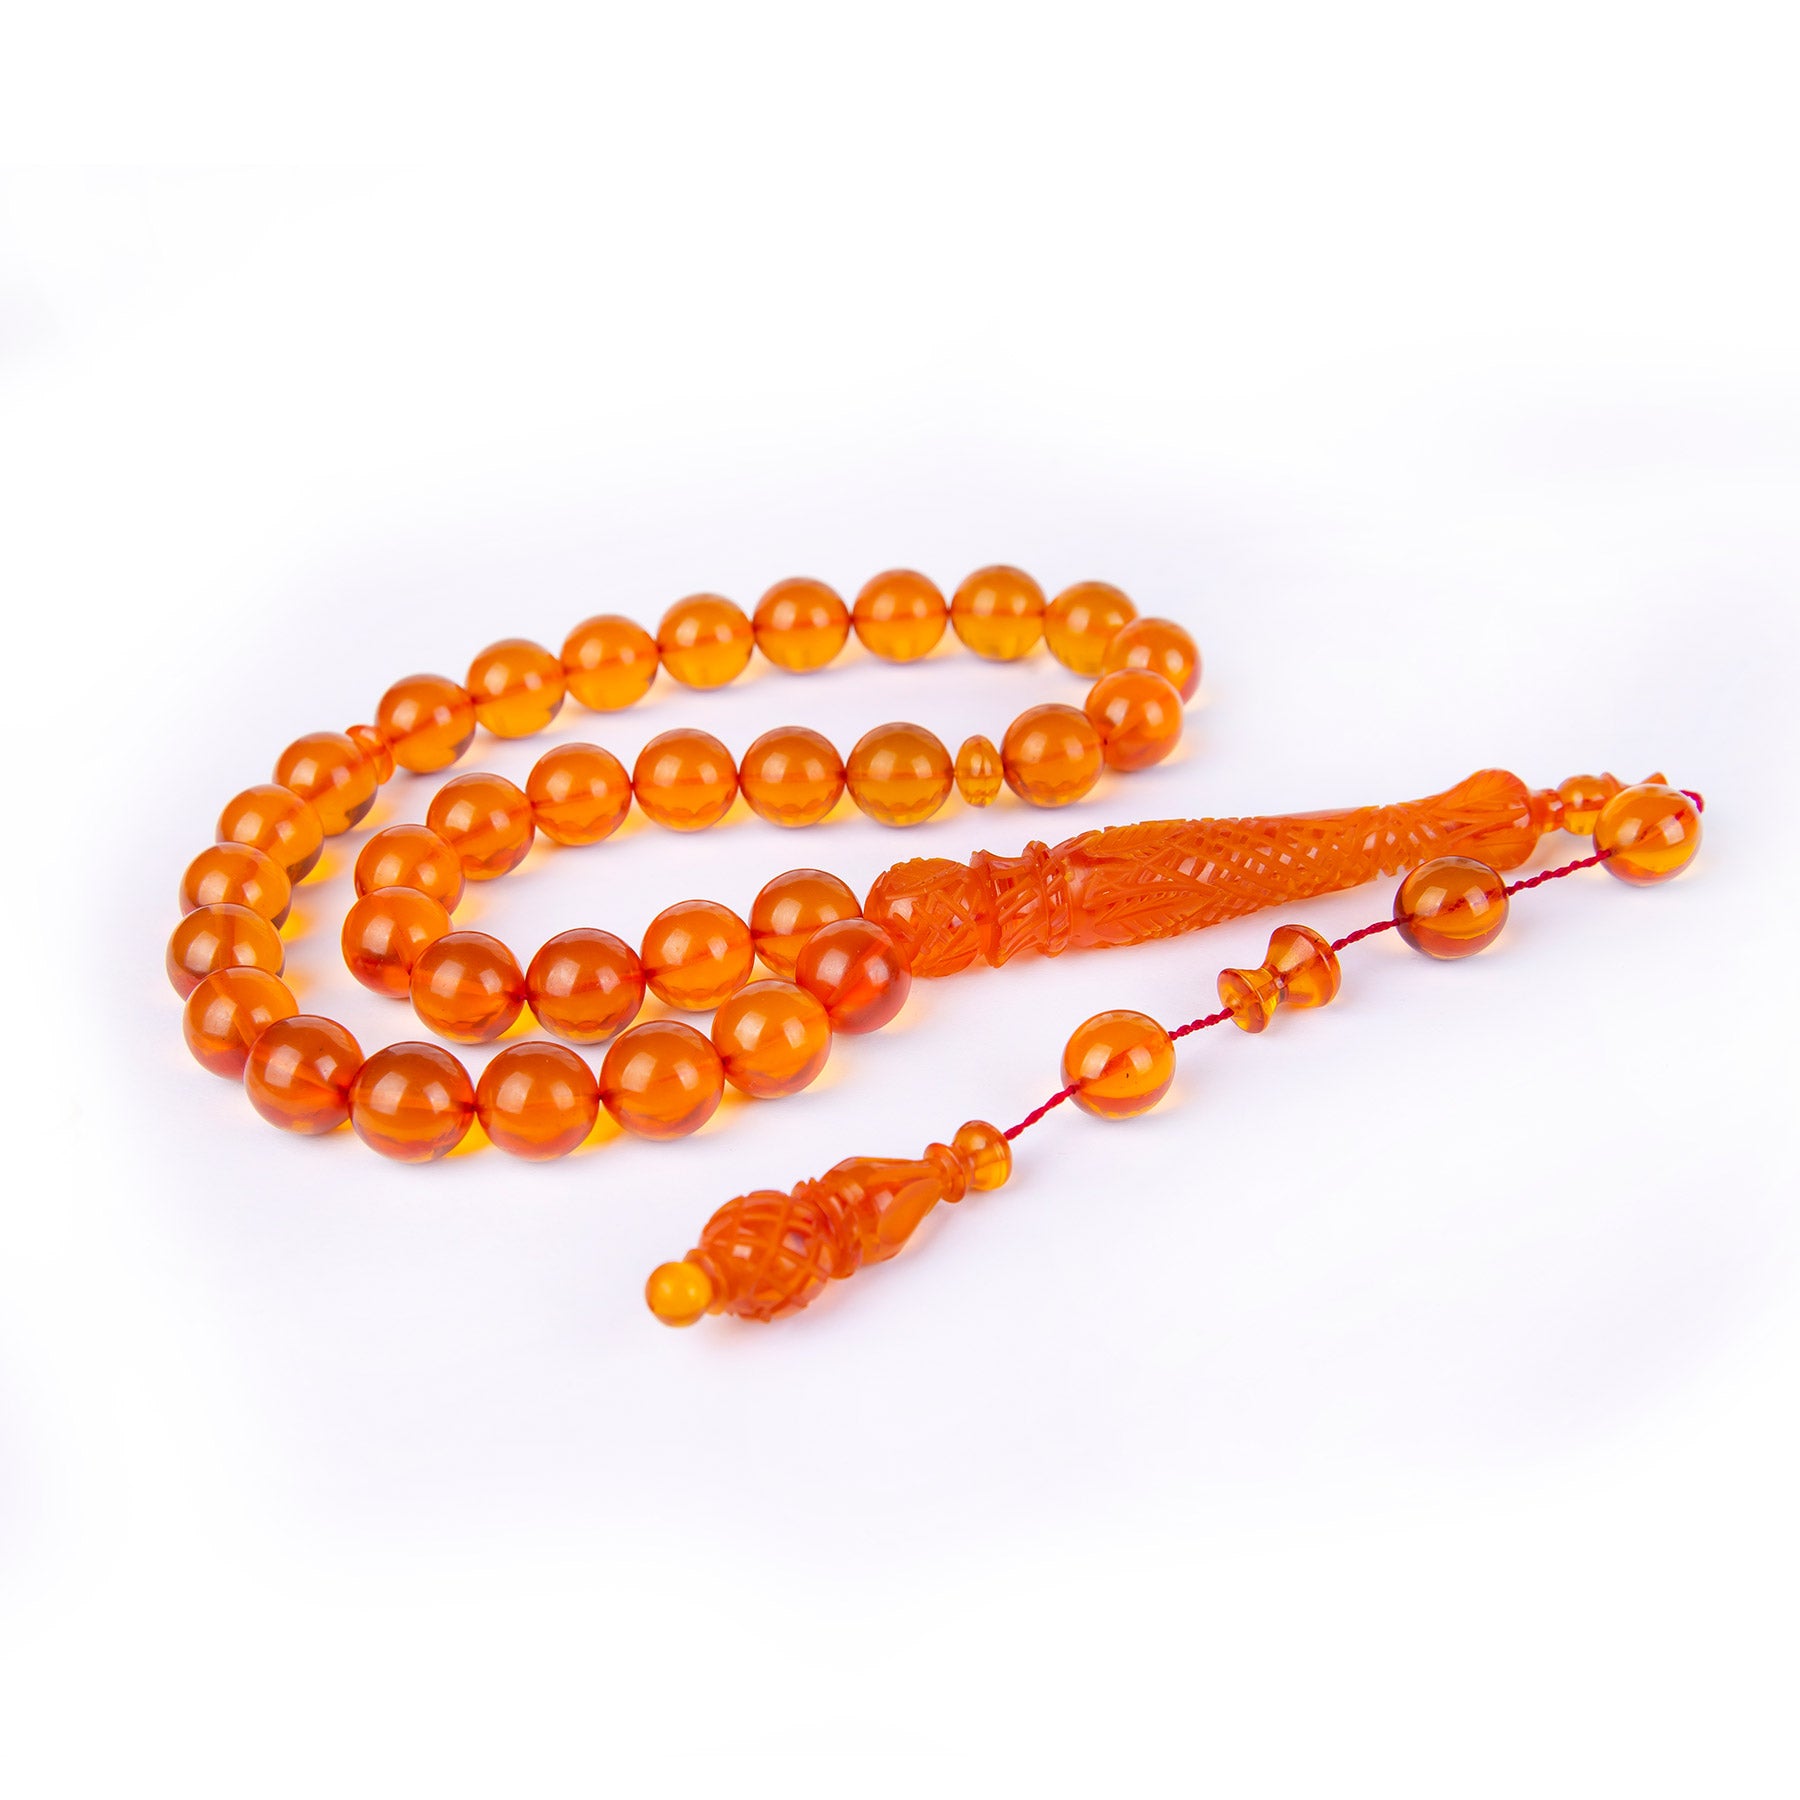 Ve Tesbih Systematic Imame Fire Amber Prayer Beads 4